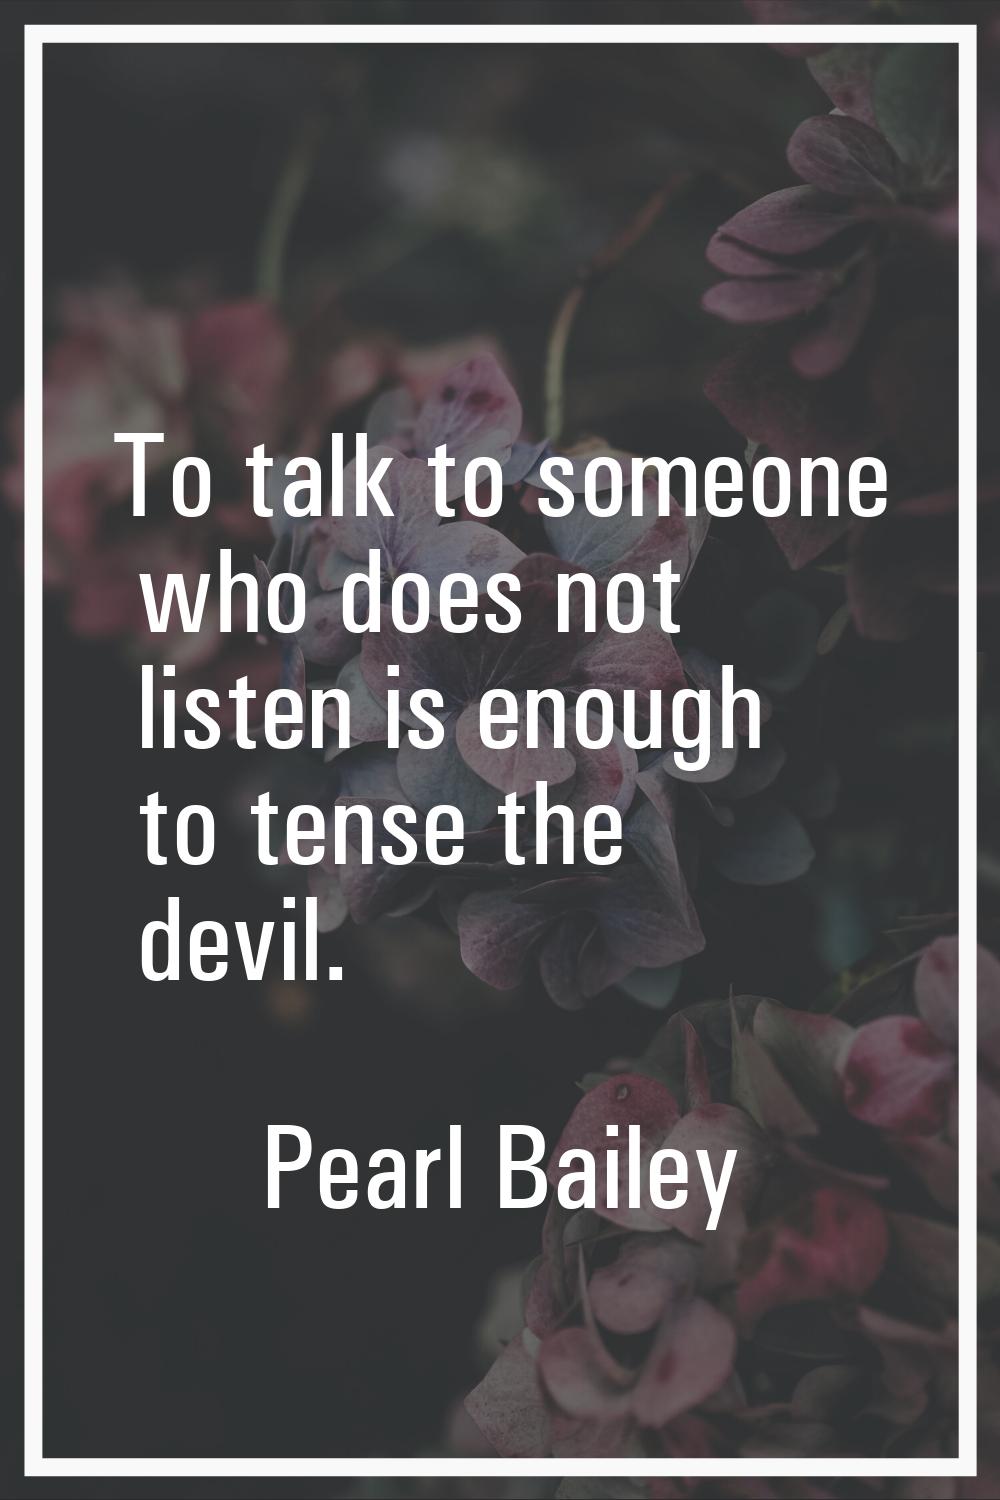 To talk to someone who does not listen is enough to tense the devil.